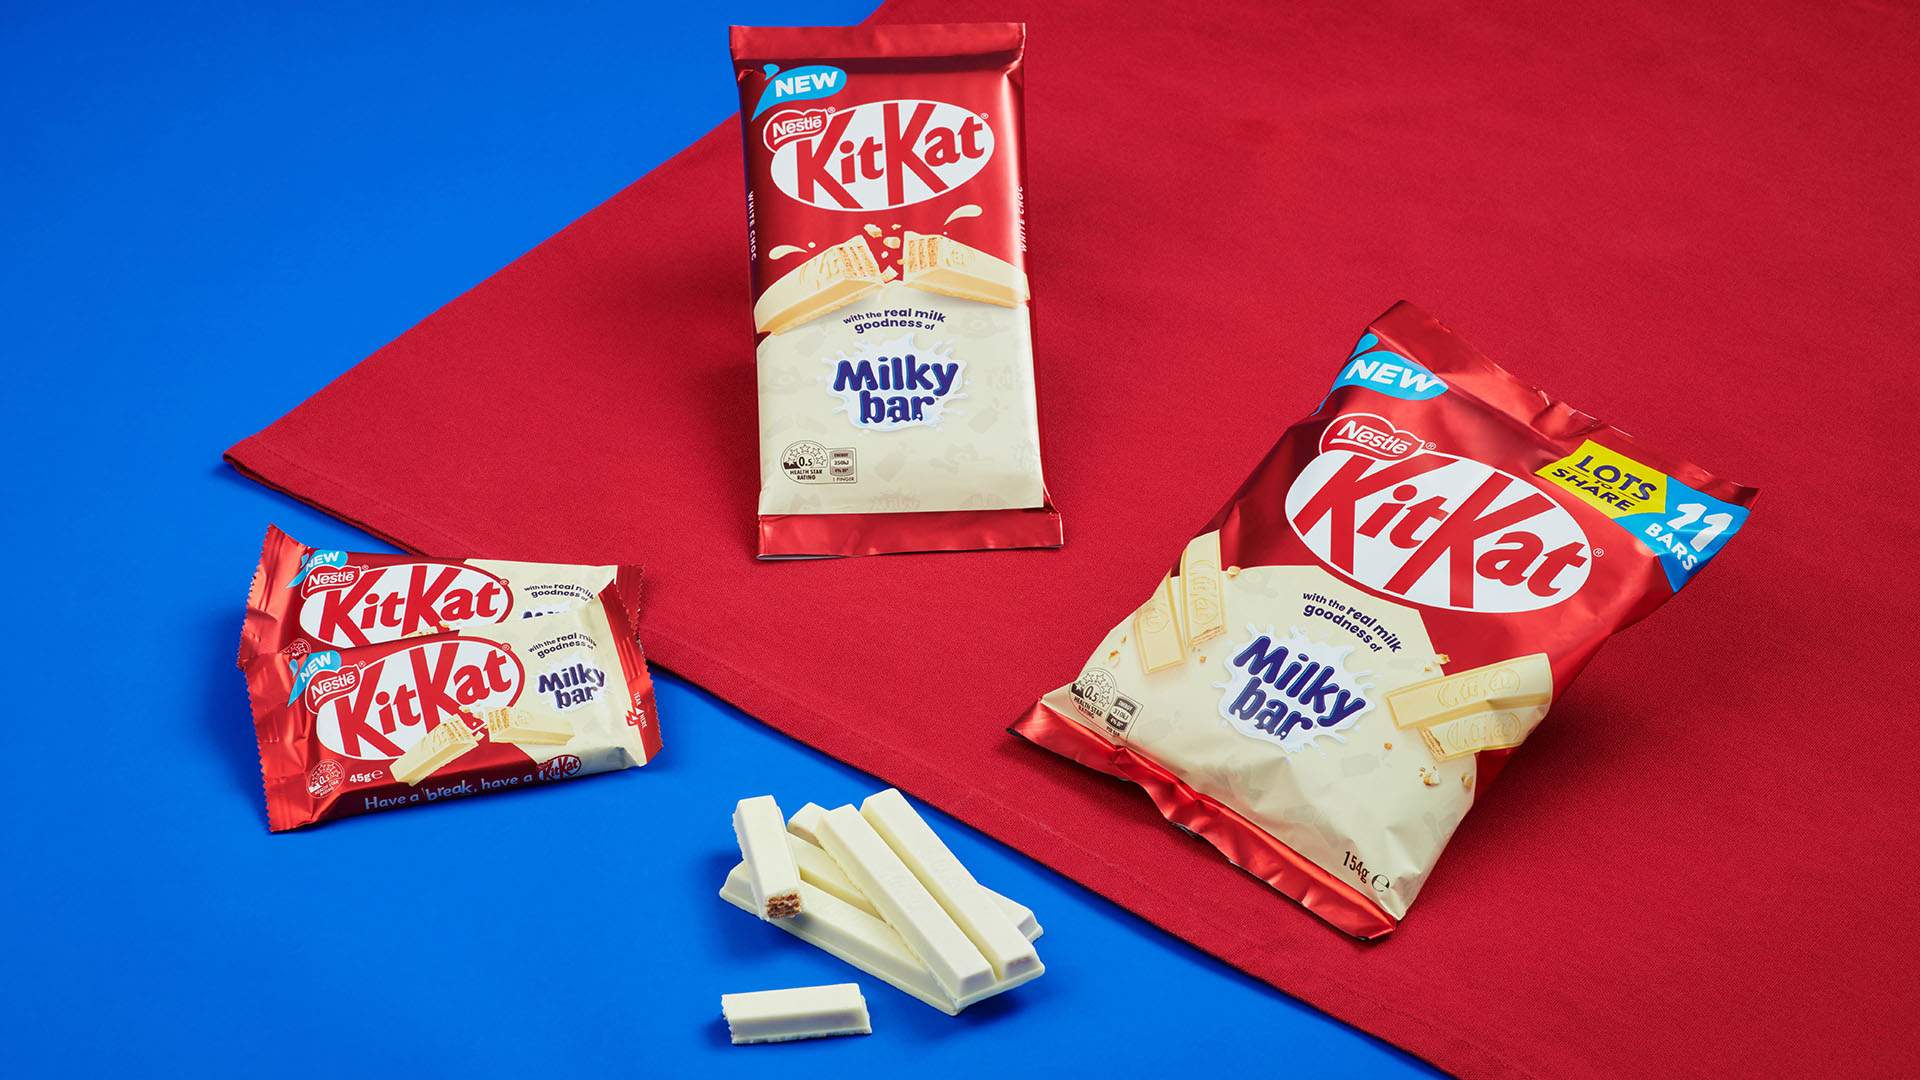 KitKat Is Following Up Its Milo Collaboration with a New Nostalgic Milkybar Range